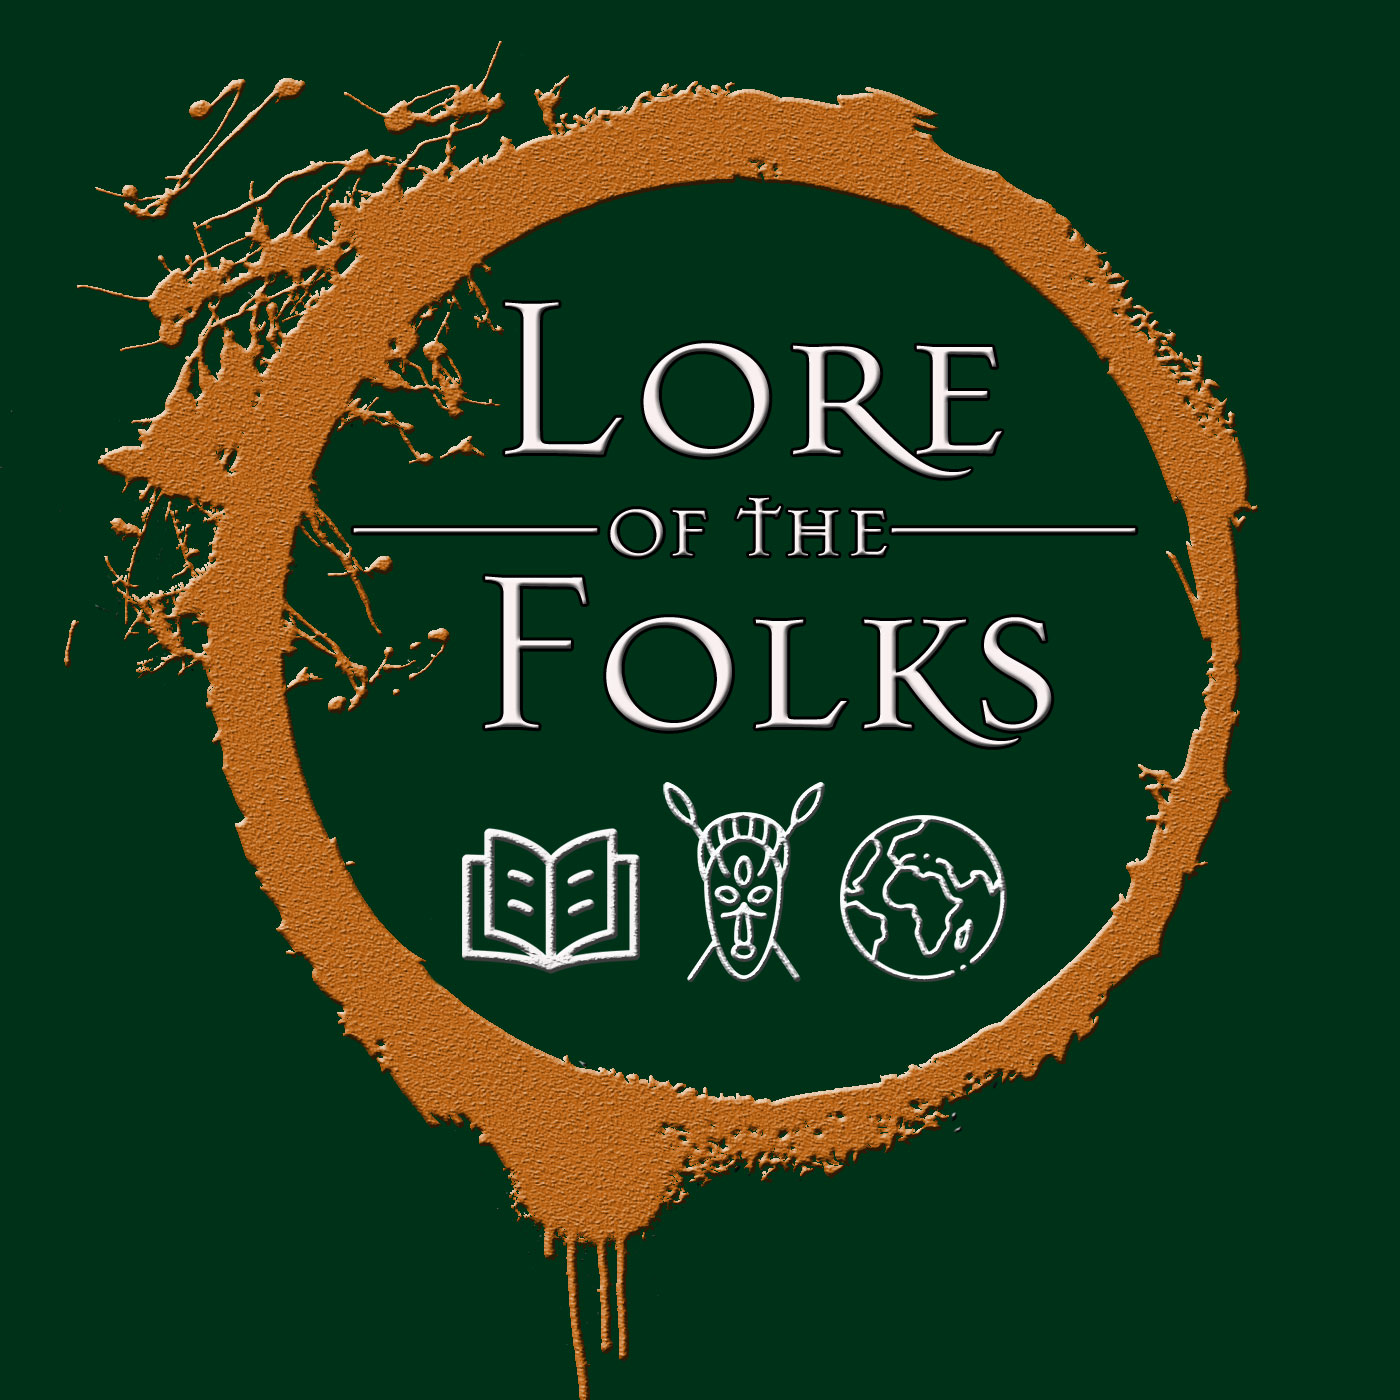 Lore of the Folks